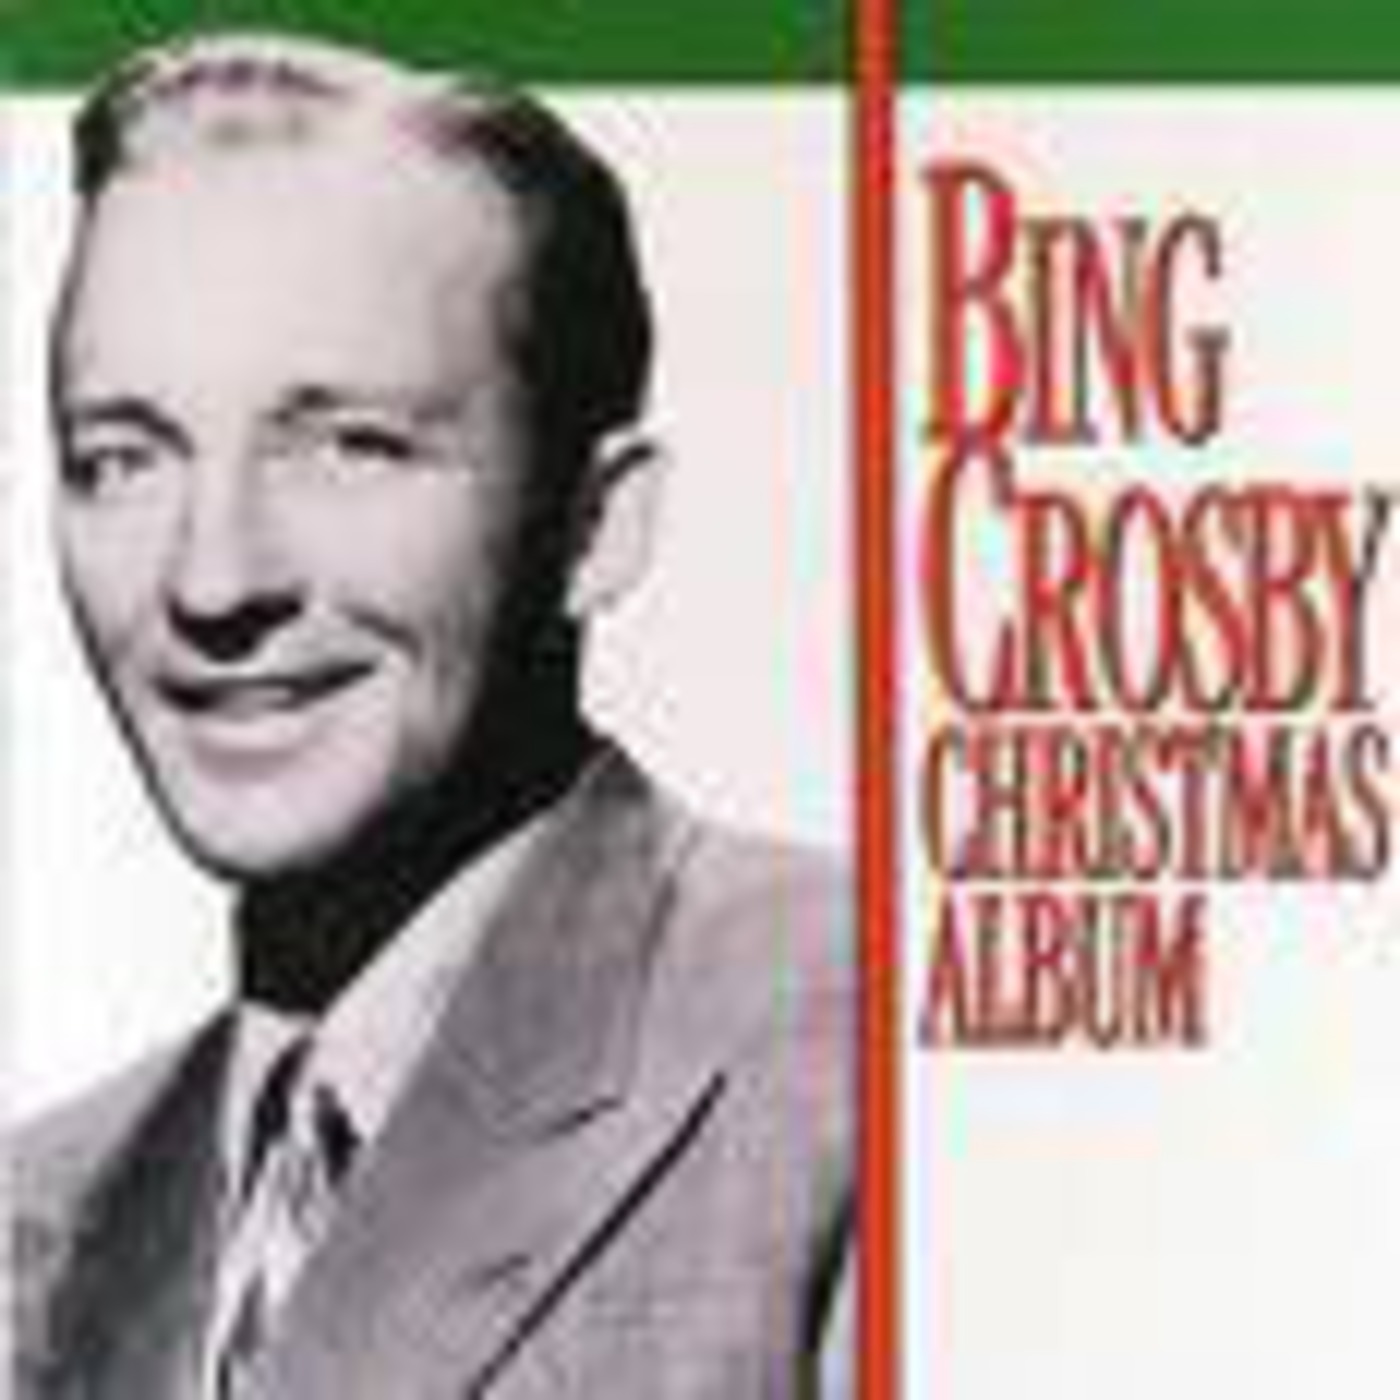 Bing Crosby _ Its a White Christmas special